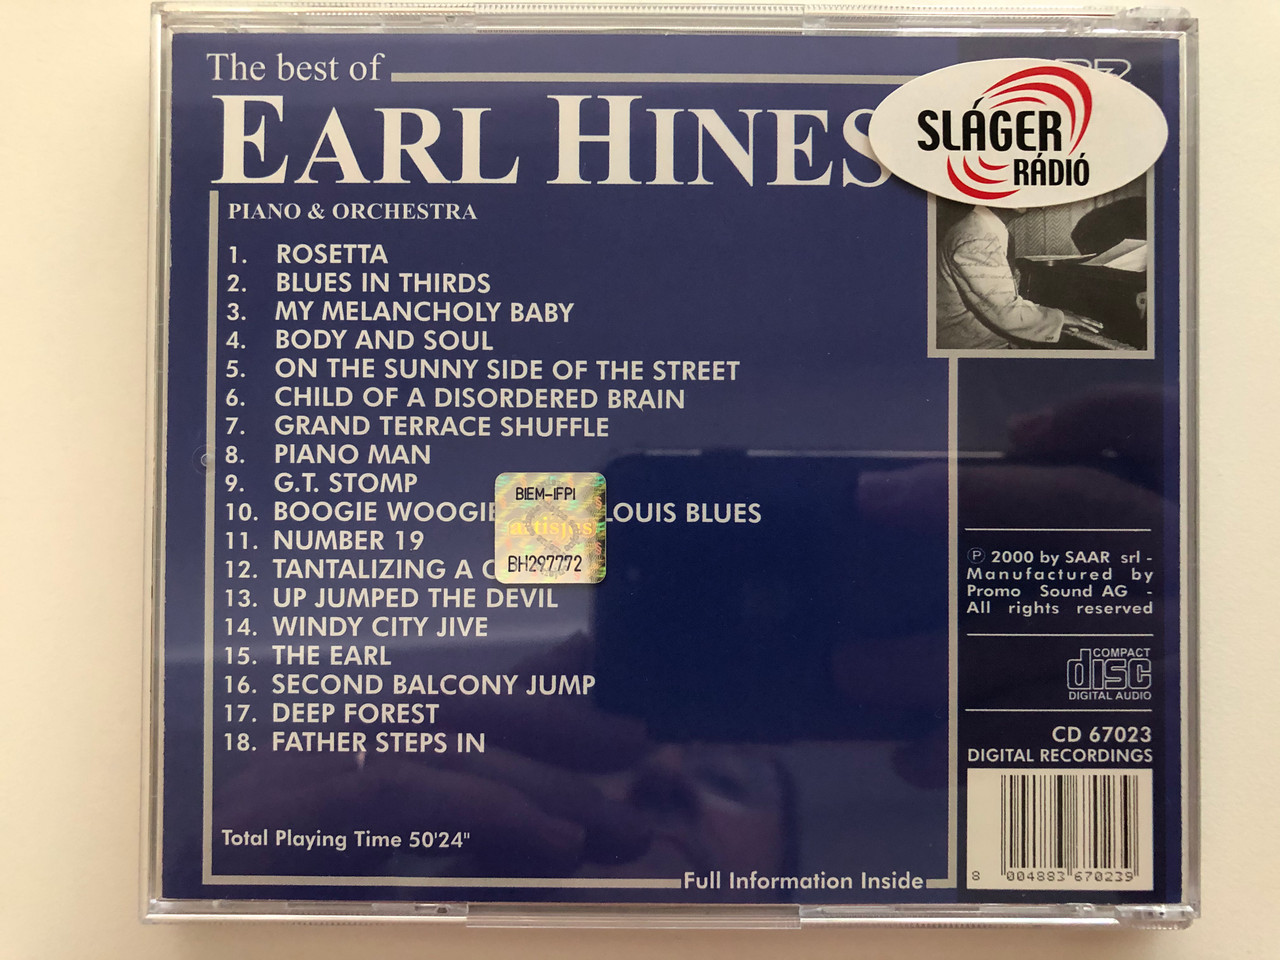 https://cdn10.bigcommerce.com/s-62bdpkt7pb/products/28774/images/171653/The_Best_Of_Earl_Hines_-_Piano_Orchestra_Rosetta_Grand_Terrace_Shuffle_Piano_Man_Blues_in_Thirds_Jazz_Forever_Audio_CD_2000_CD_67023_4__53543.1616000311.1280.1280.JPG?c=2&_ga=2.203924816.154268922.1617891306-1247300196.1617891306